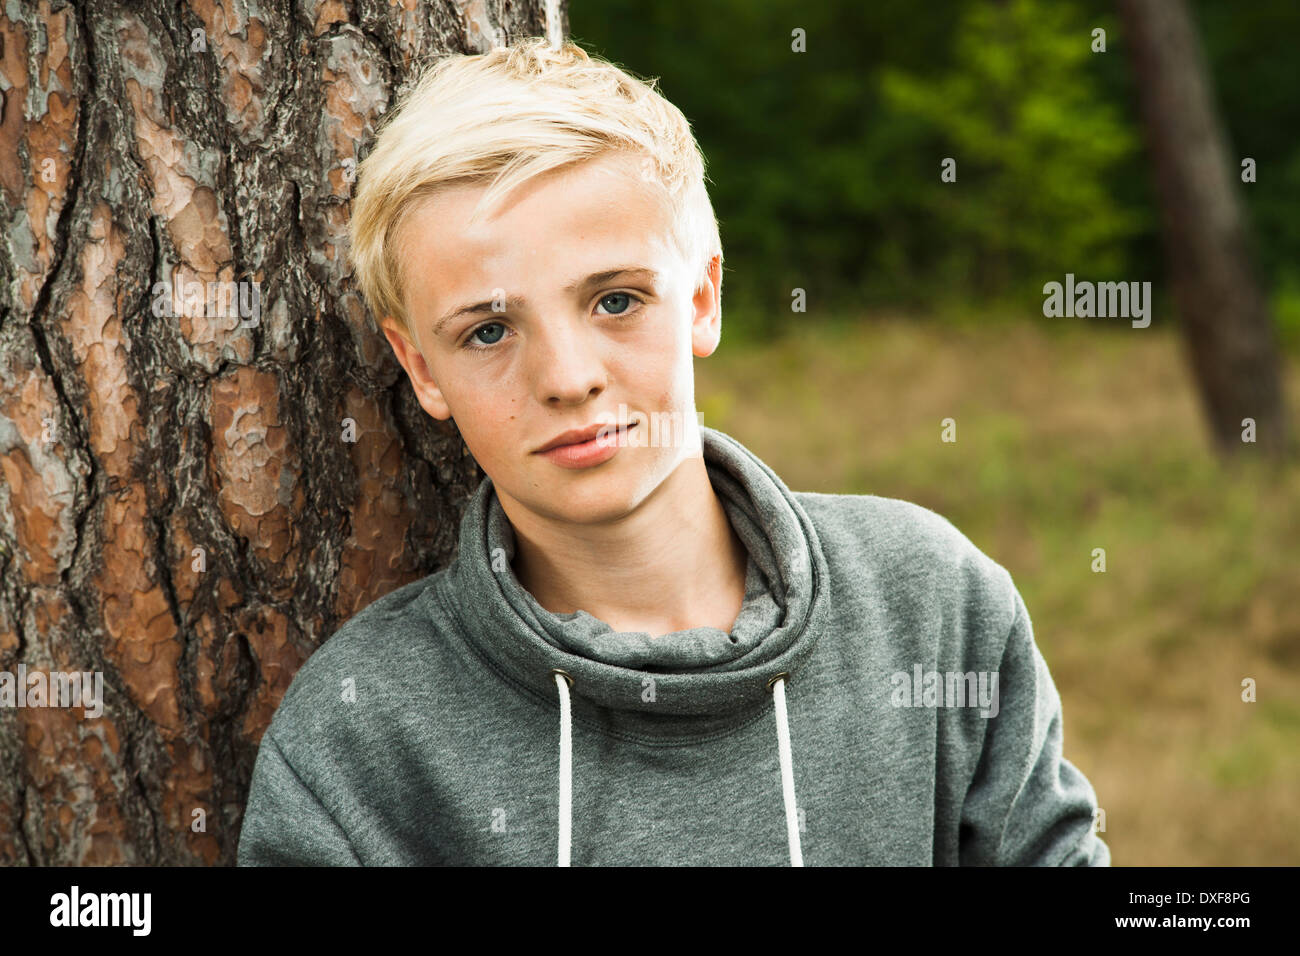 Close-up portrait of boy standing in front of tree in park, looking at camera, Germany Stock Photo